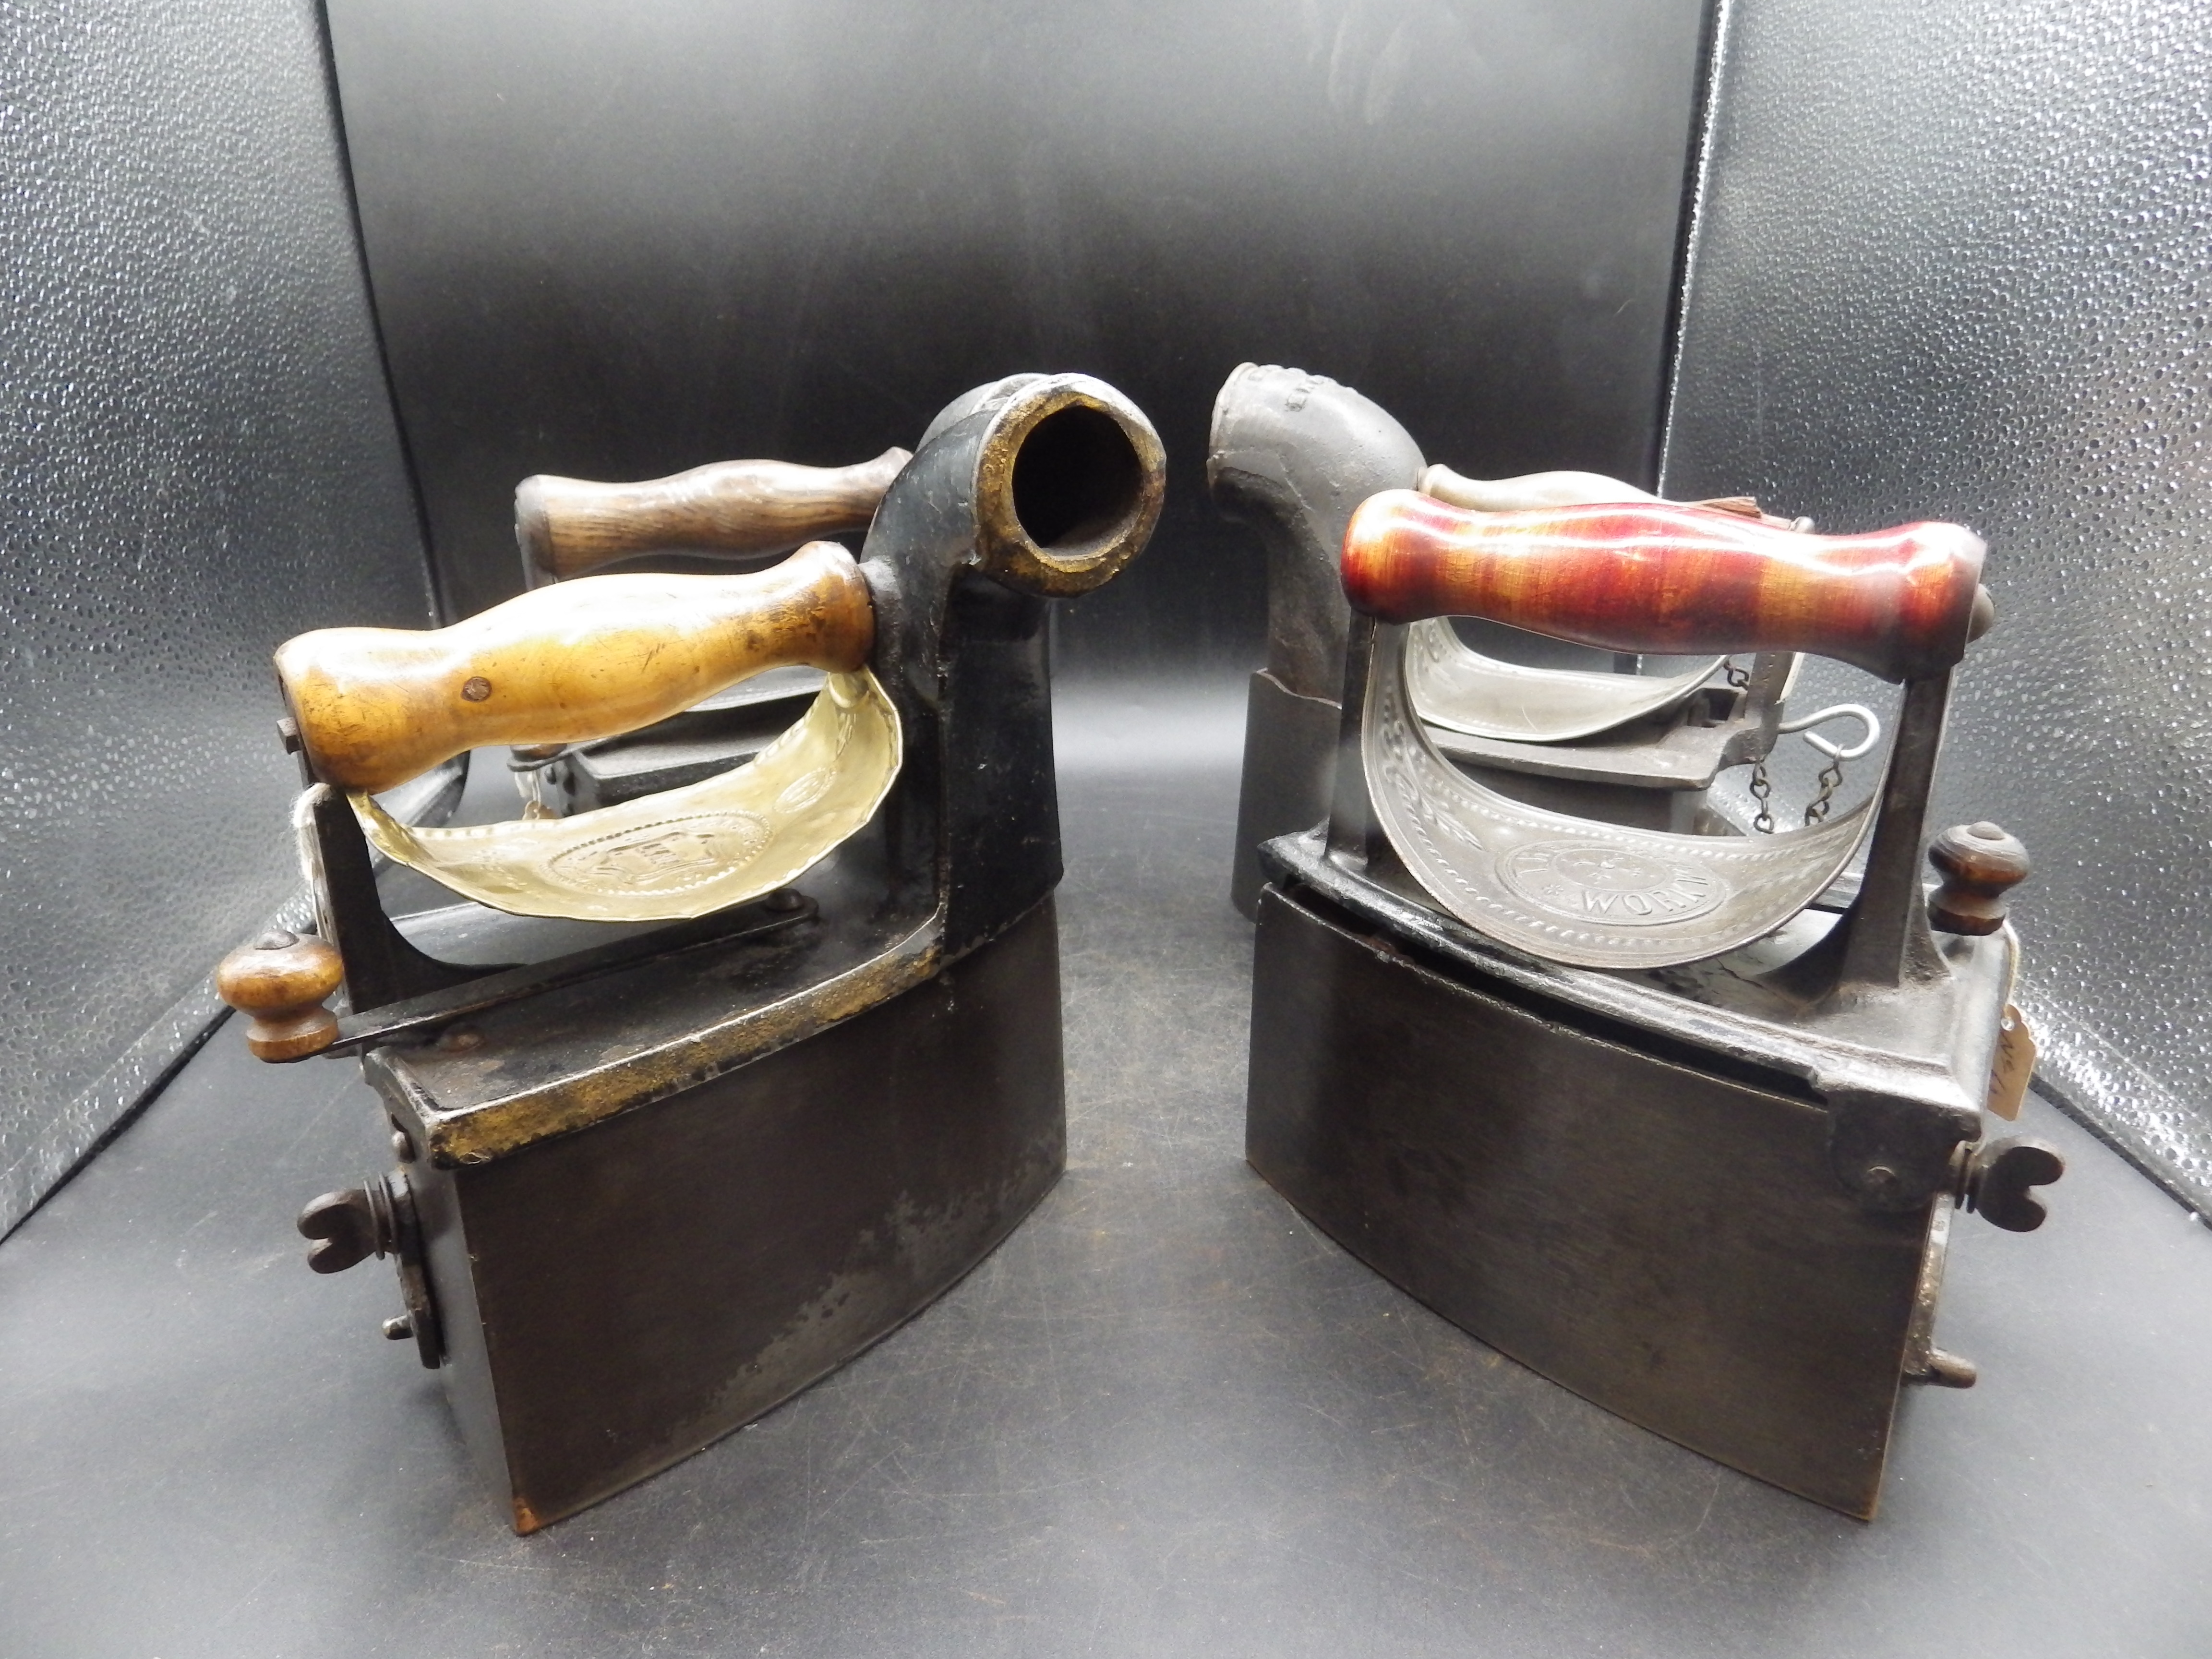 4 charcoal box irons with heat shields to incl Lync La Esperanza, The Workwell etc - Image 2 of 5